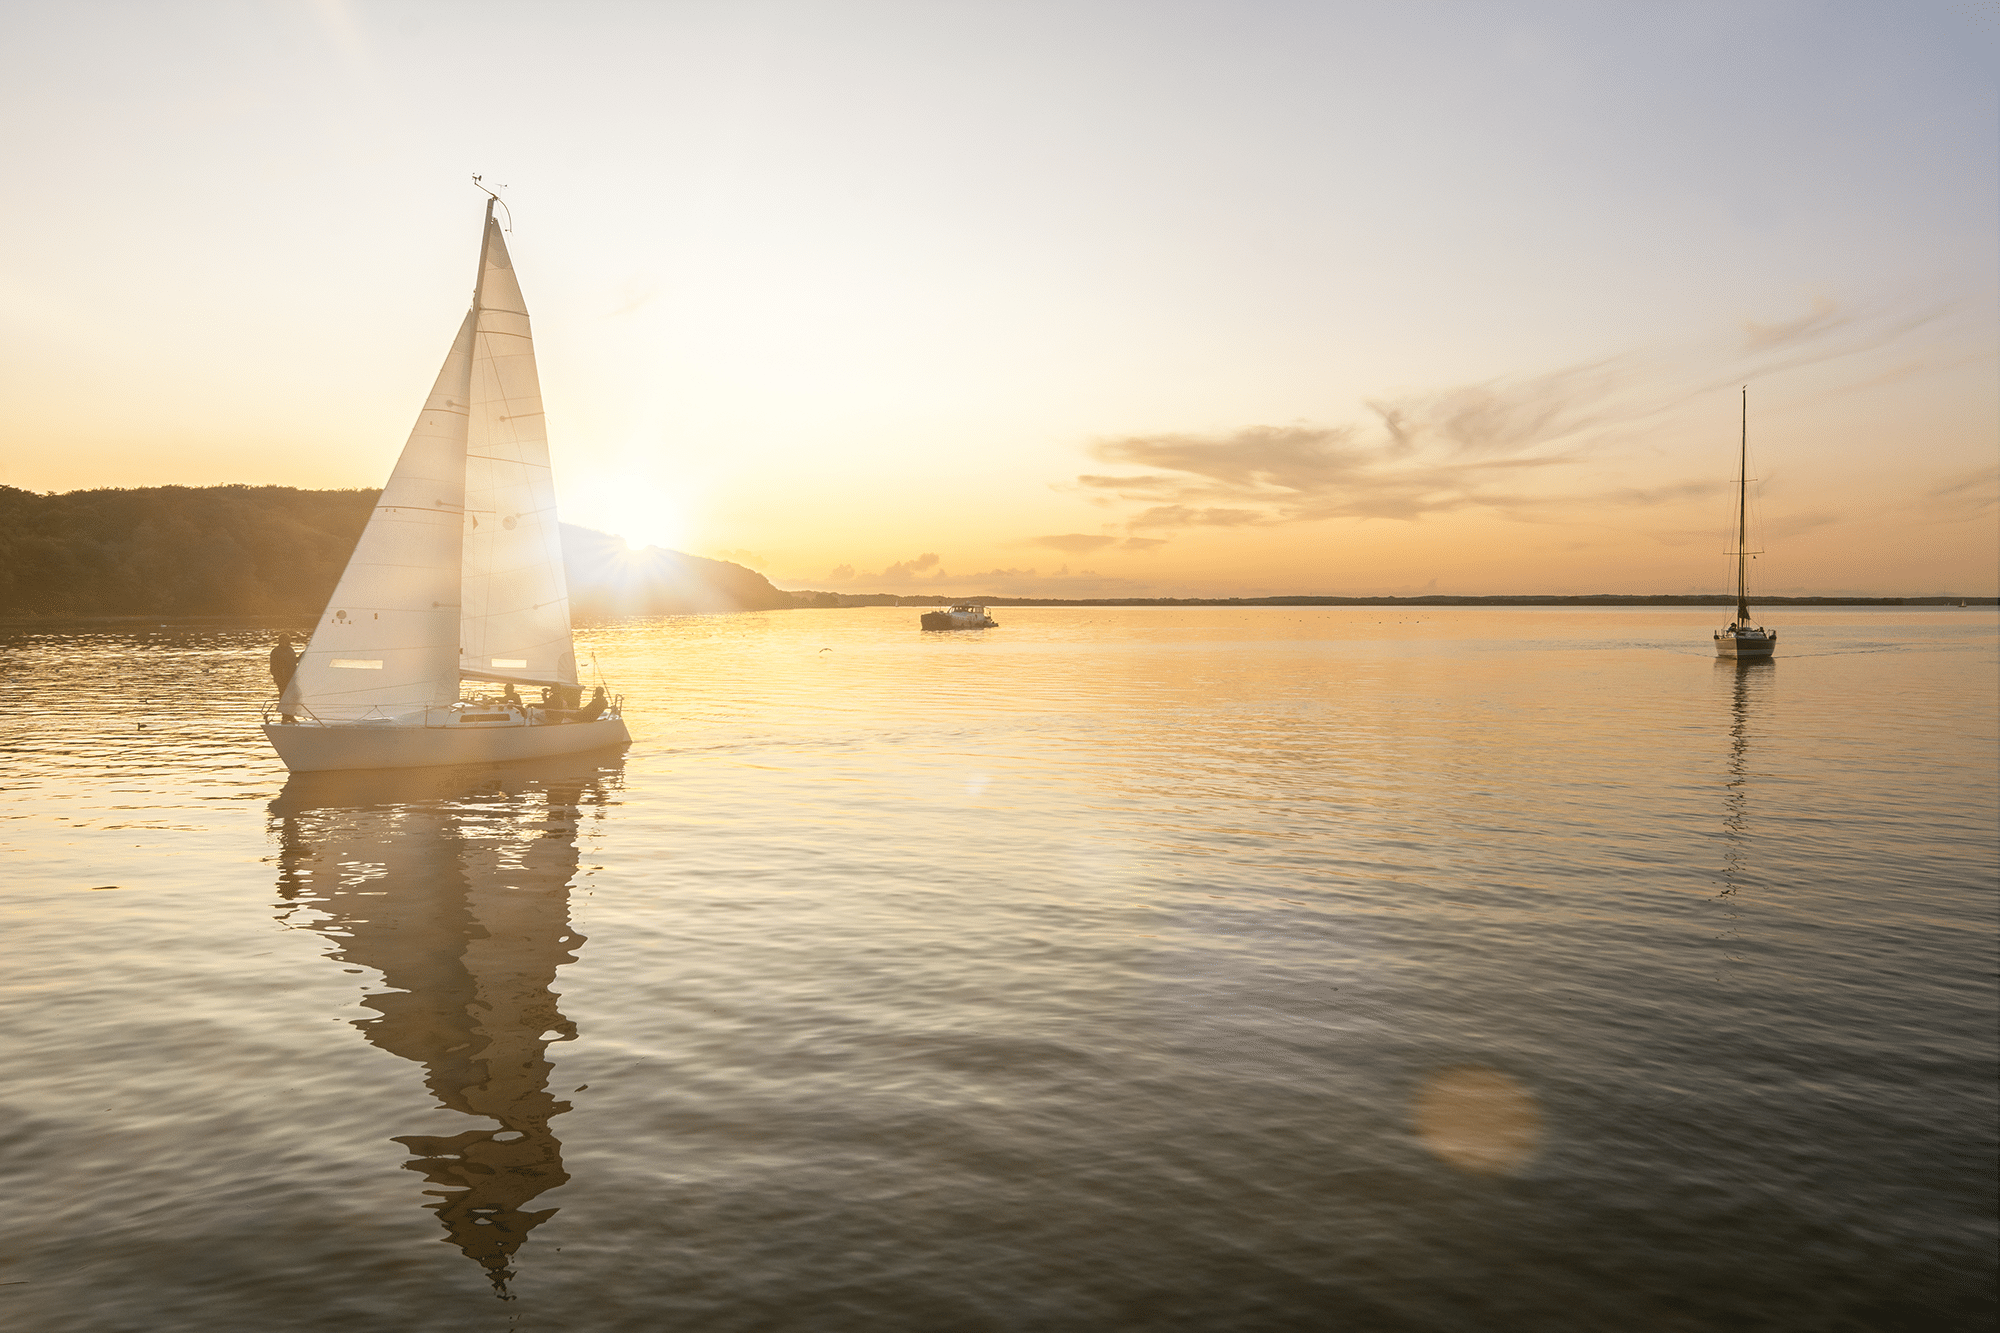 Description: A sailboat gliding on the water, bathed in the warm hues of a breathtaking sunset.